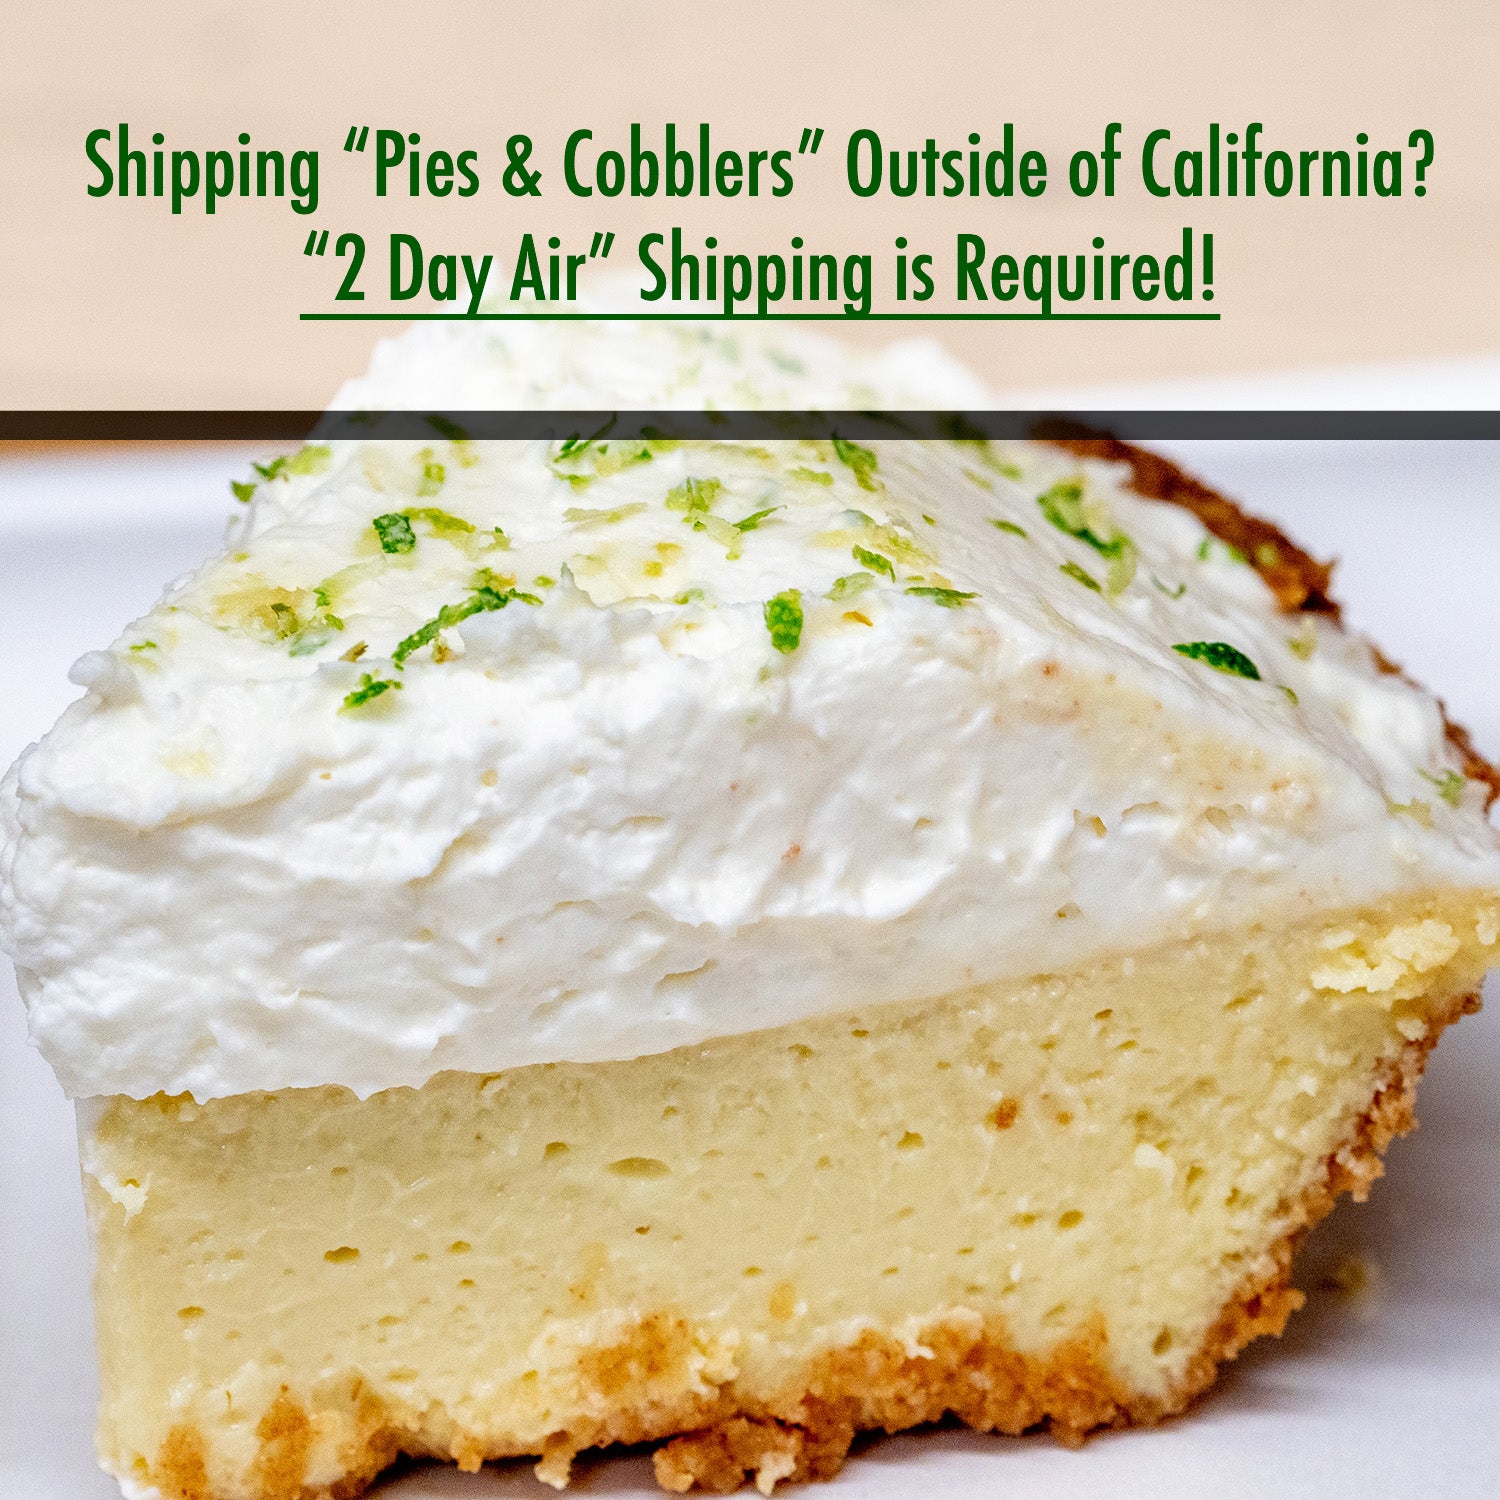 key lime pie, if shipping outside of california, 2 day air shipping required